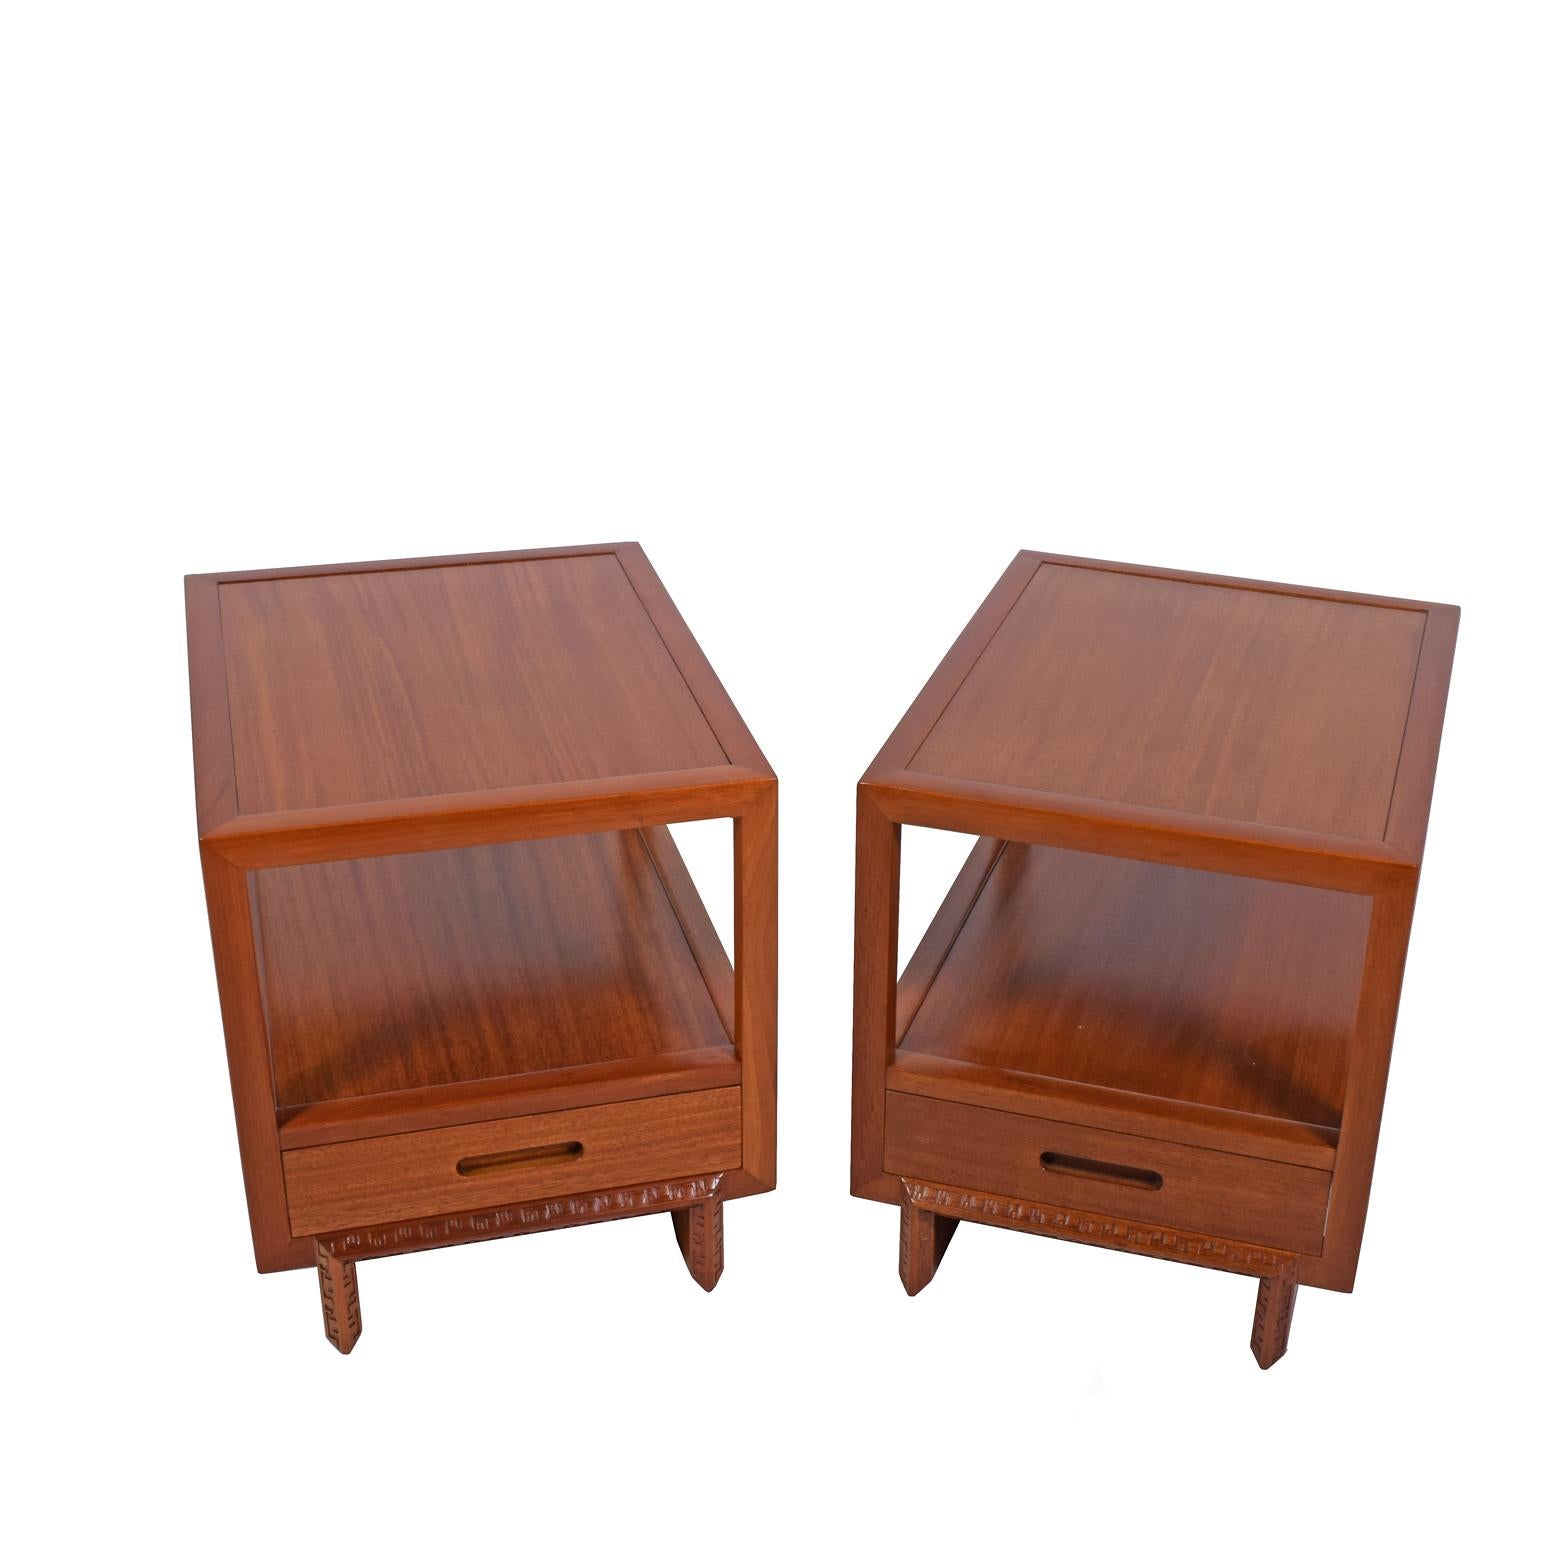 Matching pair of mahogany night tables, with one drawer and open space. Taliesen edge design. Stamped signature and red FLW mark. Made by Heritage Henredon. Signed.